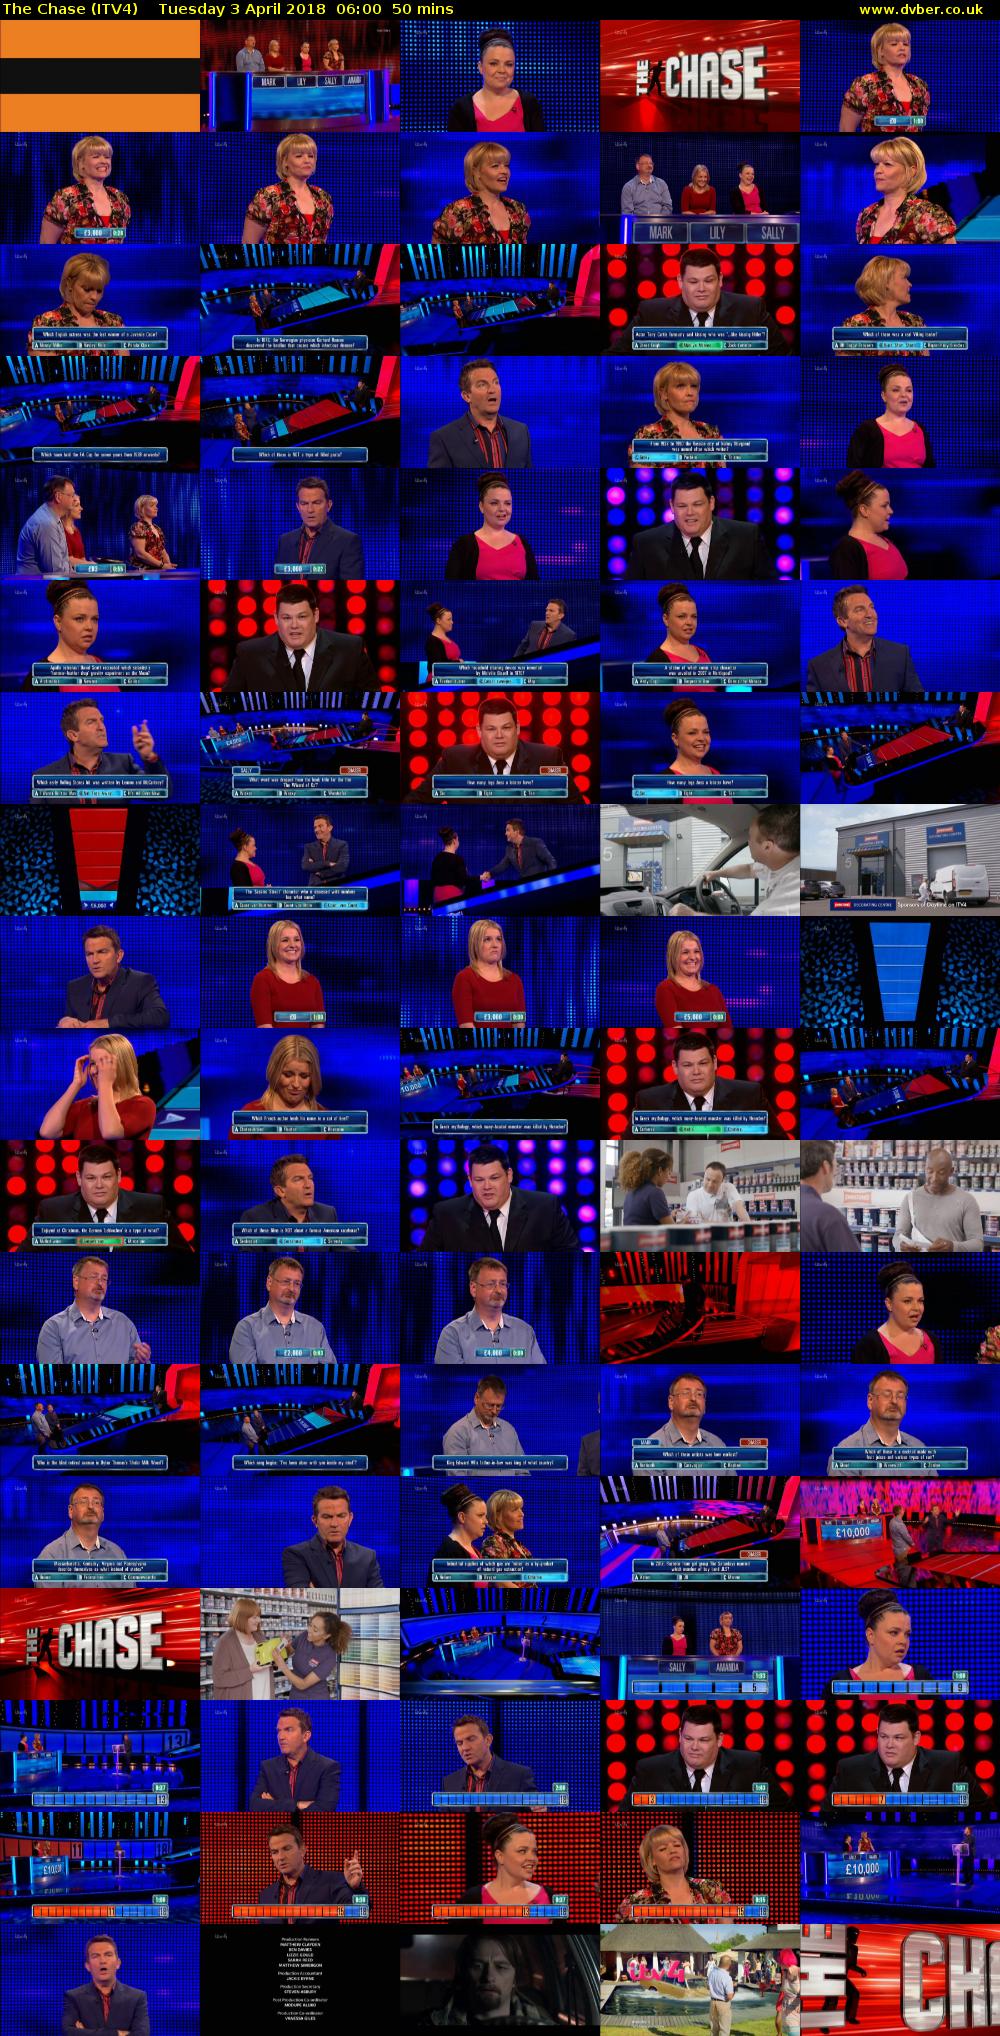 The Chase (ITV4) Tuesday 3 April 2018 06:00 - 06:50